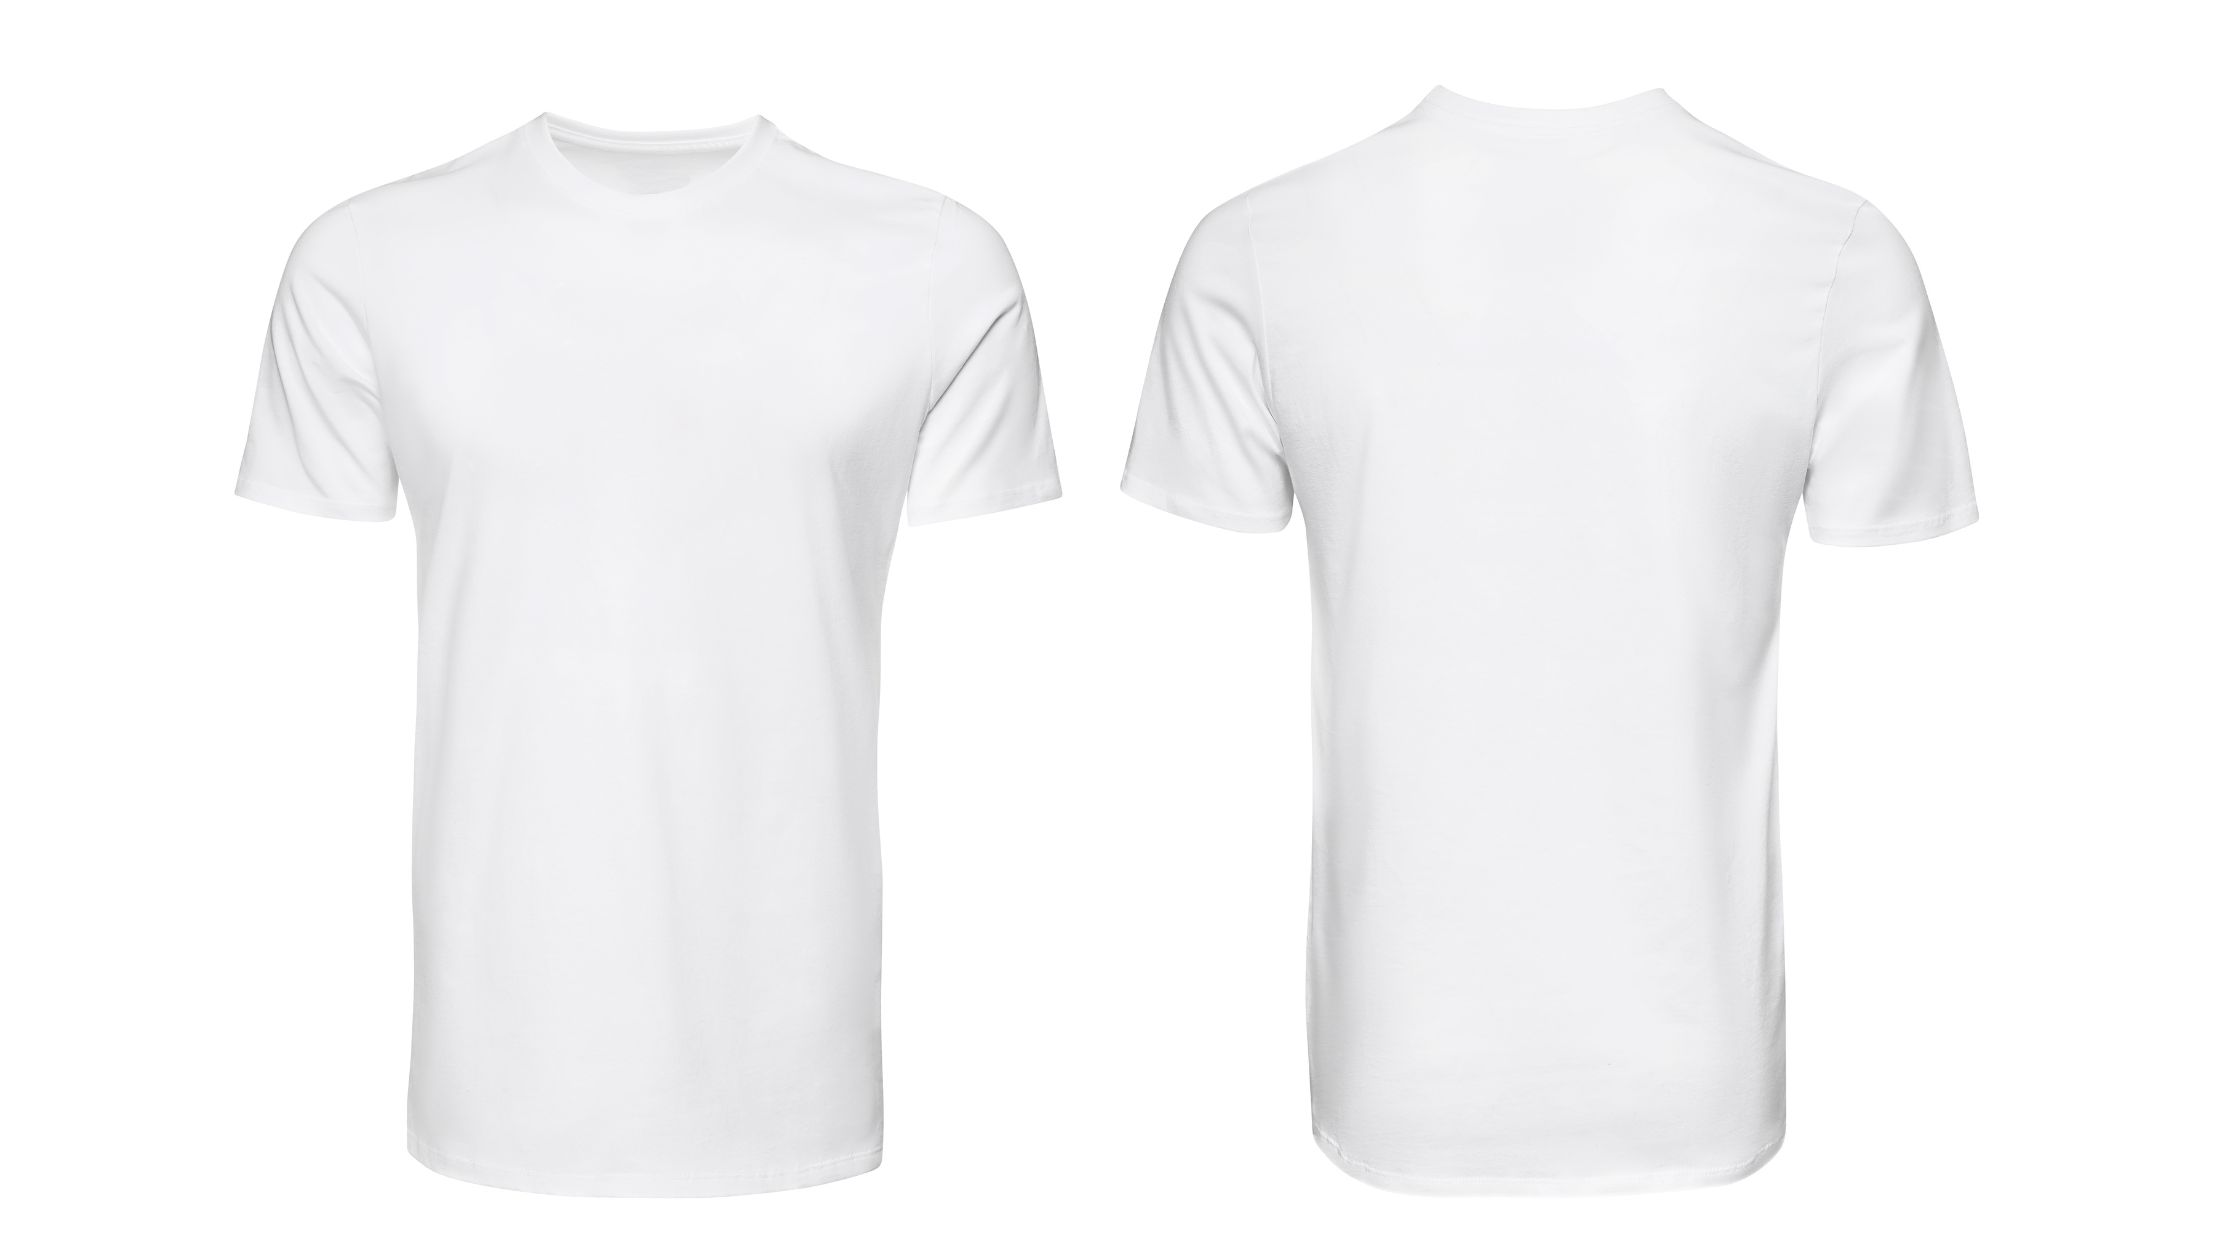 ghost mannequin effect on white shirt